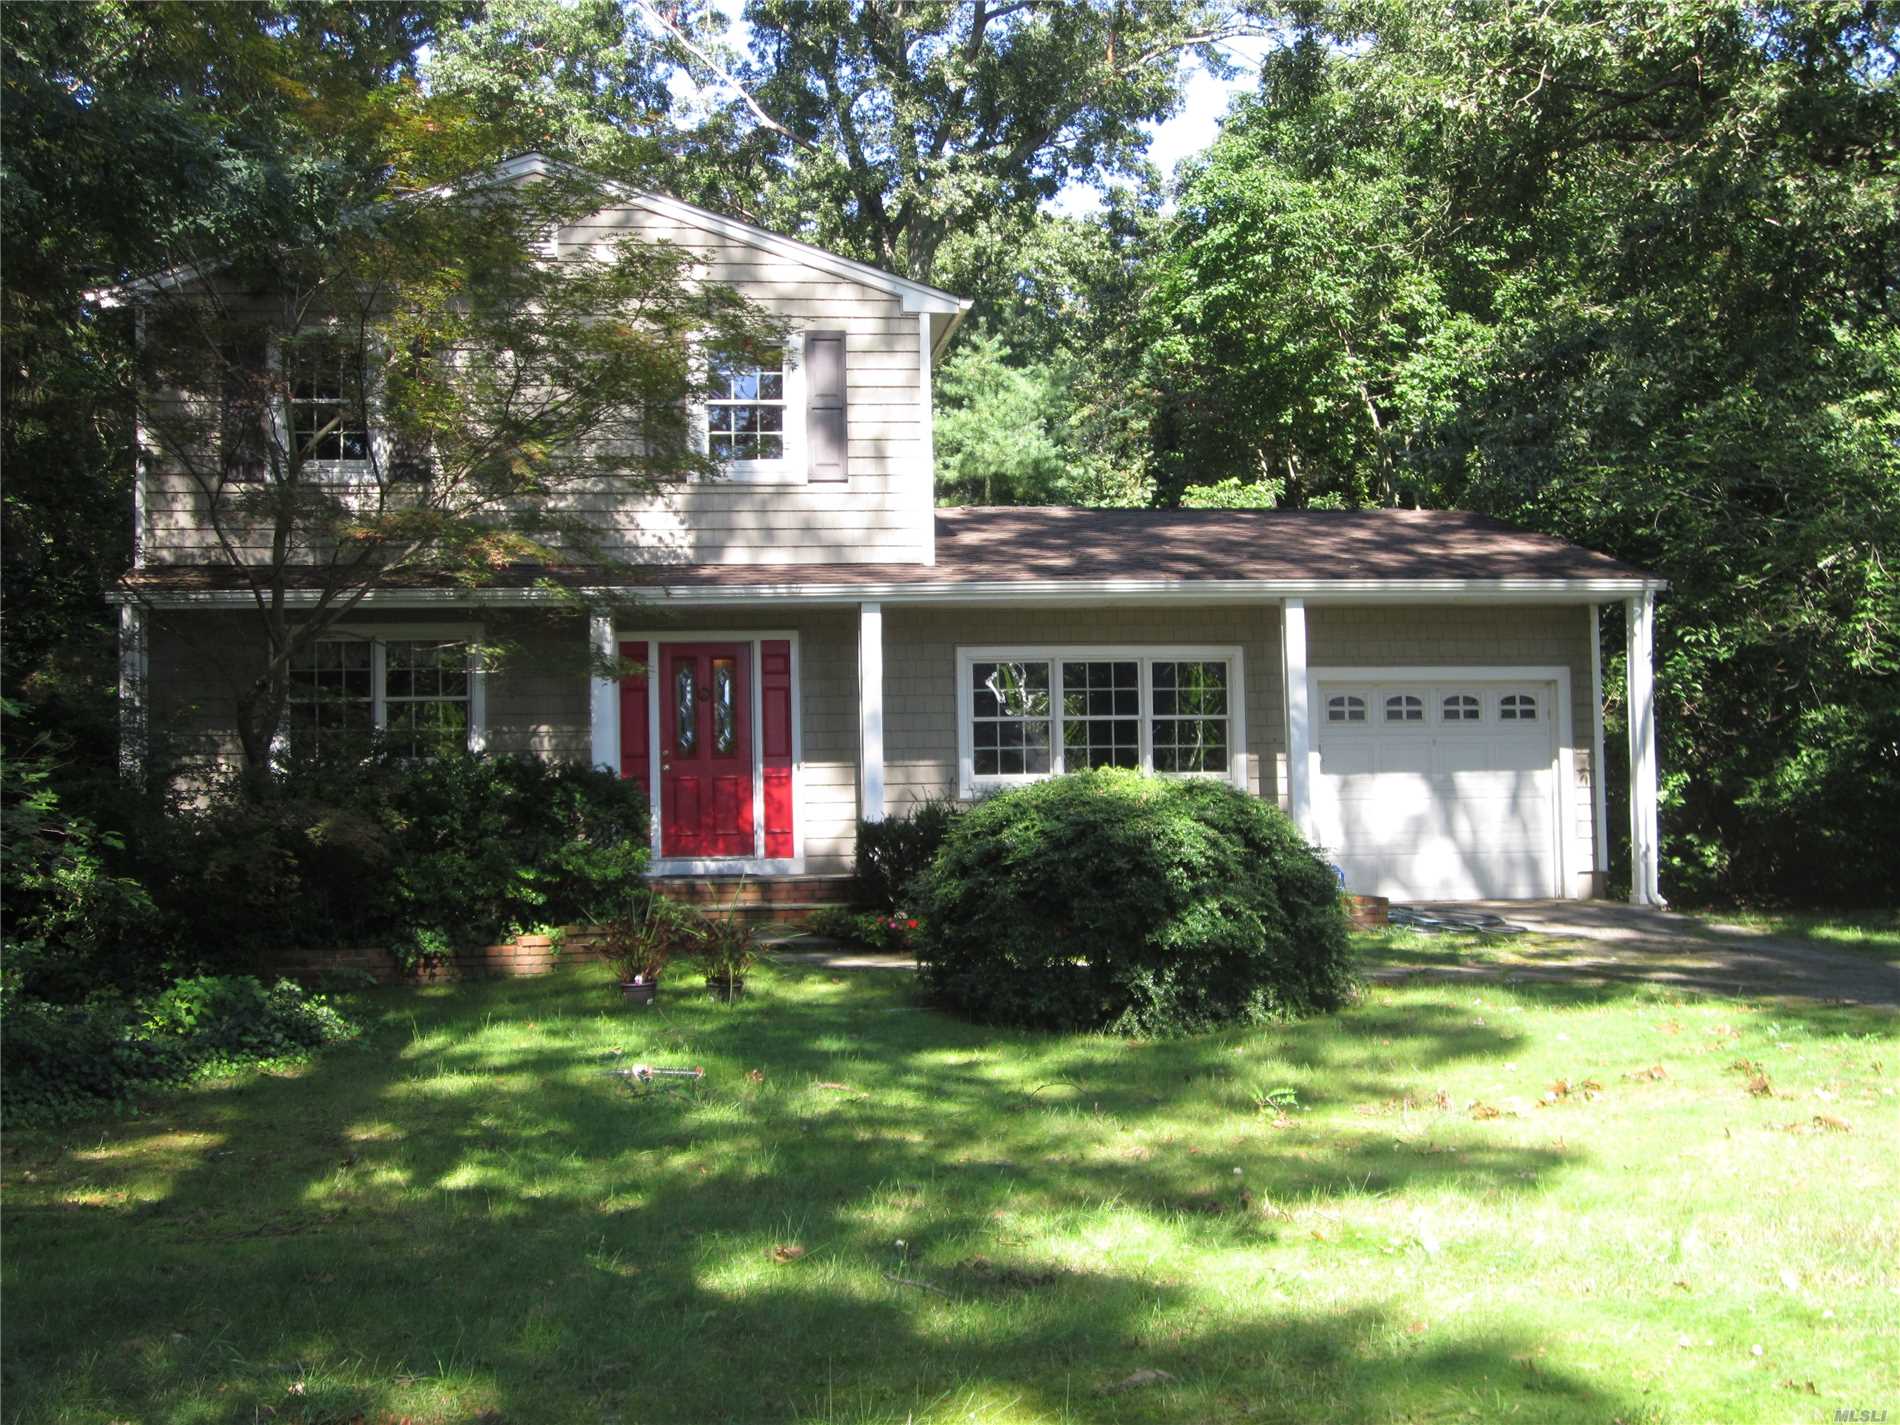 Great Opportunity To Own This Spacious 3 Bedroom, 2.5 Bathroom Colonial Home In St. James. Large Property. Home Sold As Is, Needs Tlc, Hardwood Floors, Some Updated Exterior, Master Br W.Master Bathroom, Smithtown Sd, As Is No Representations, Don&rsquo;t Miss This One!